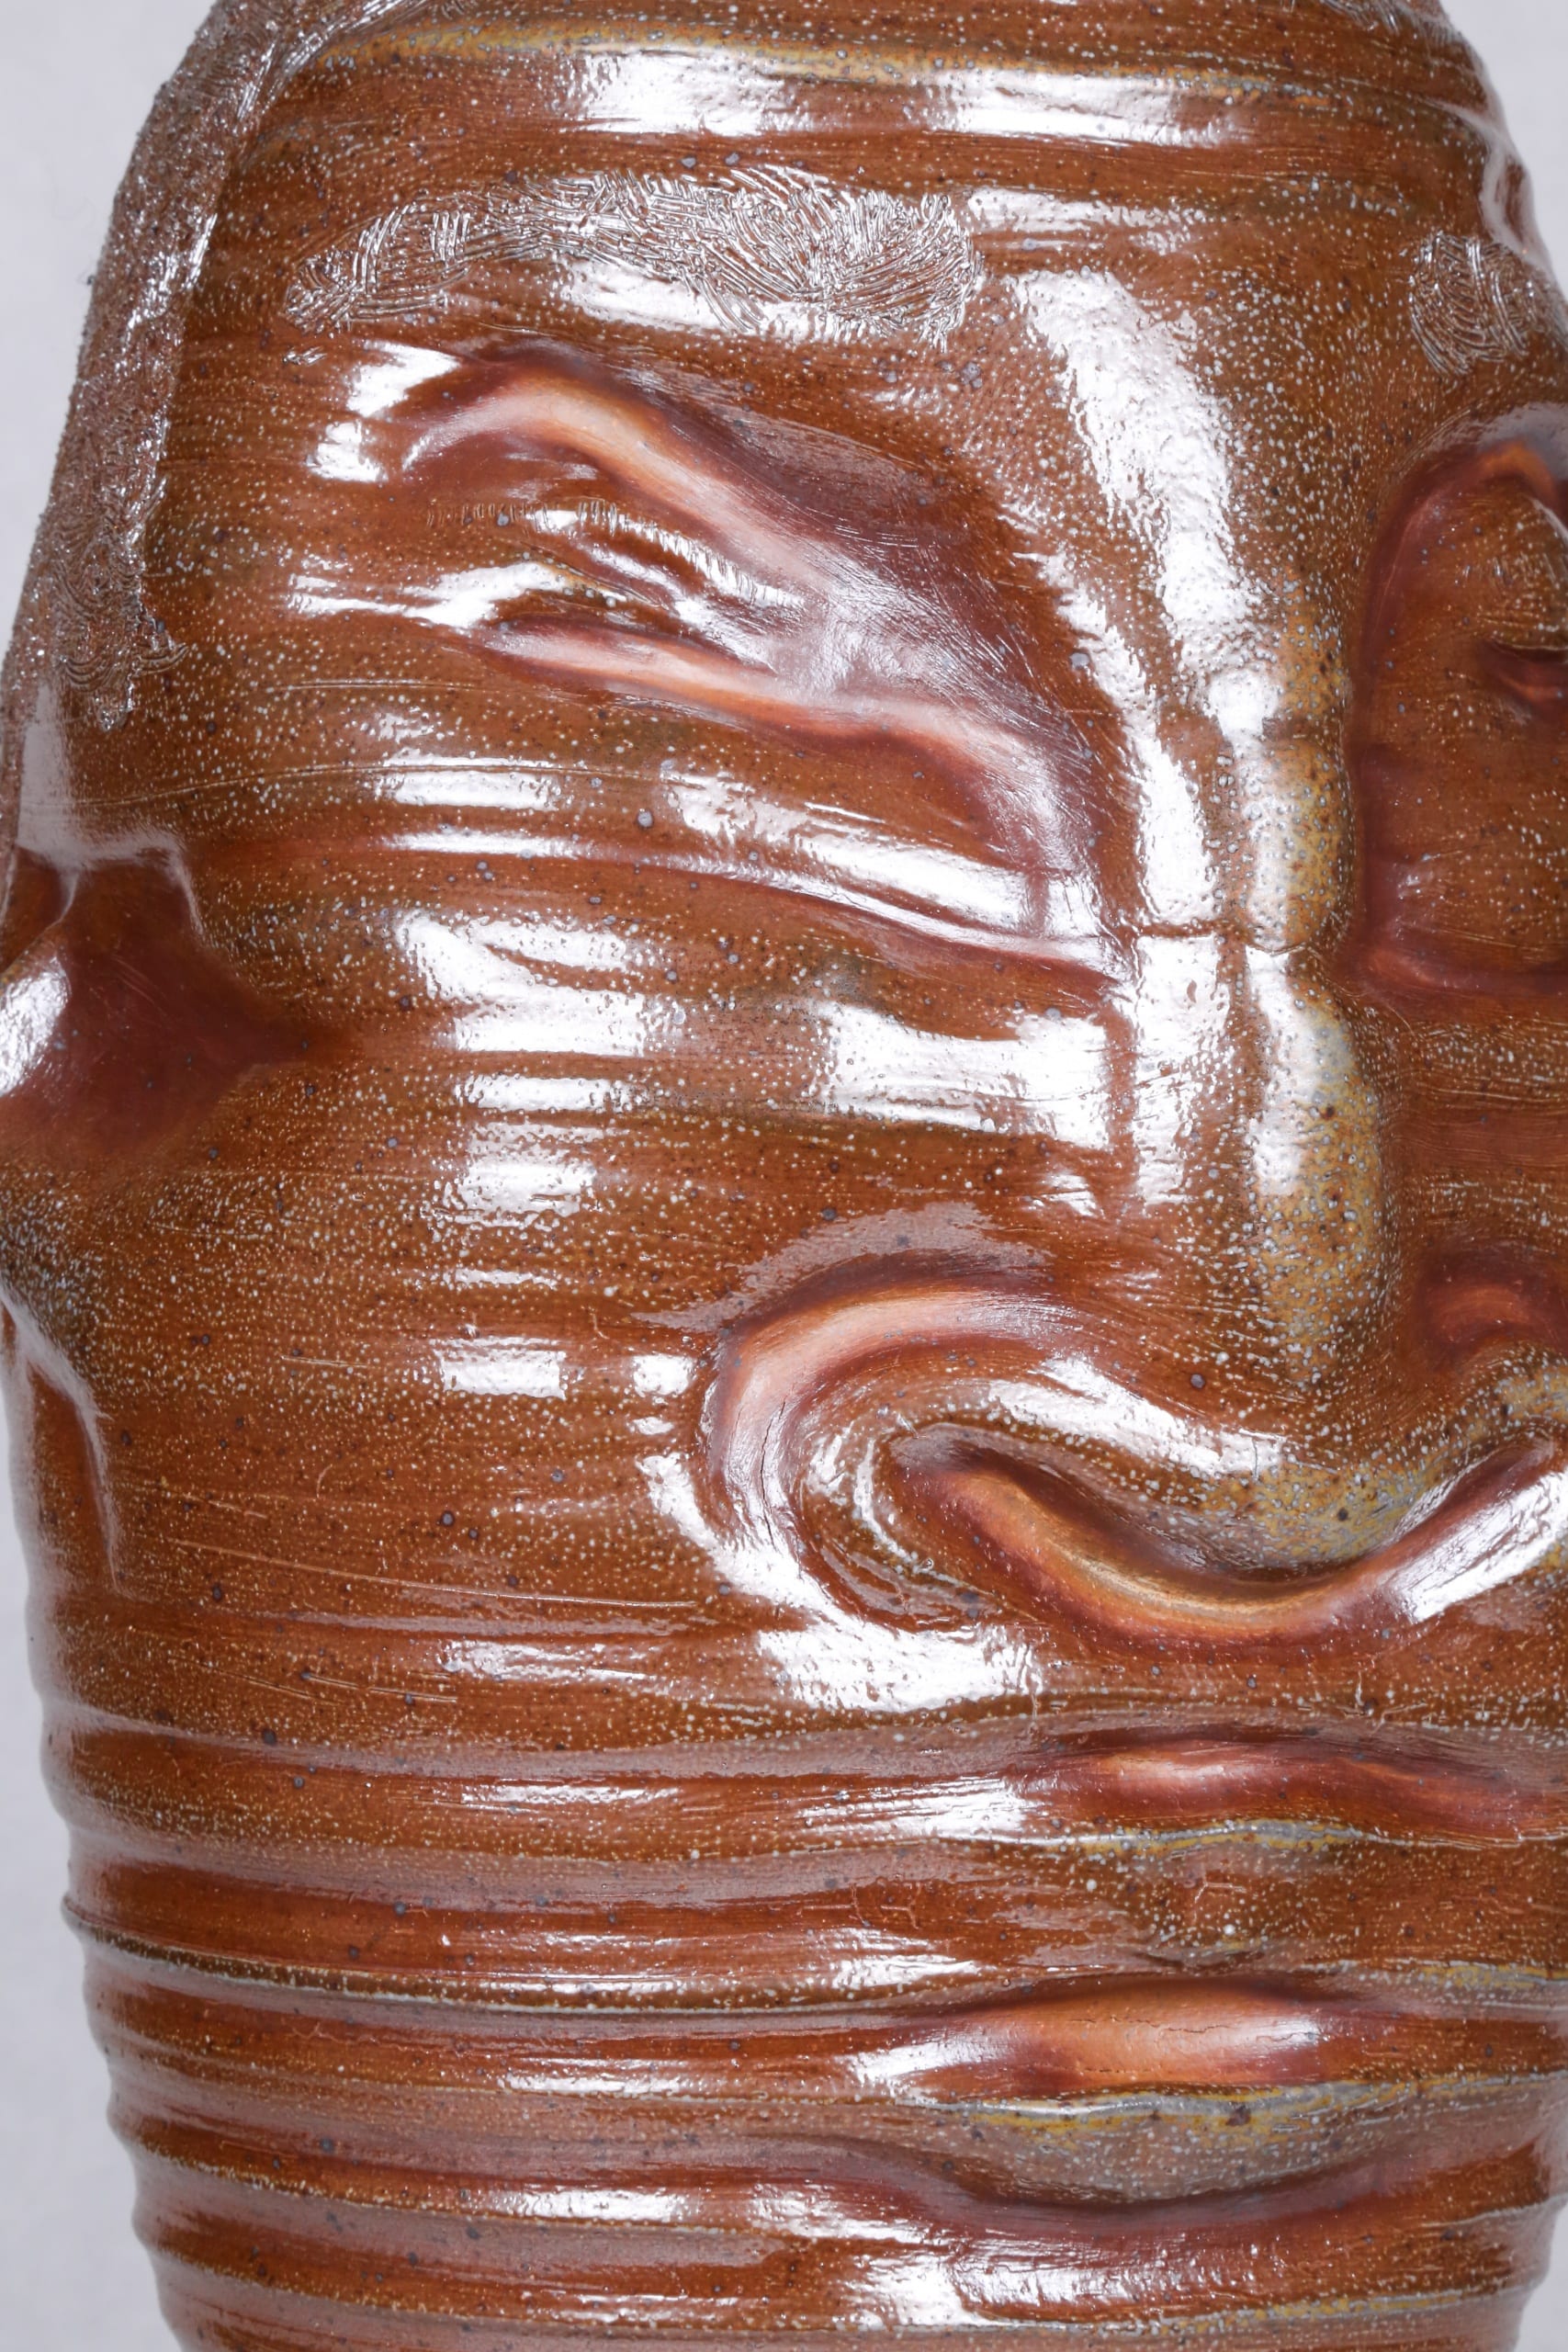 Color photograph of an abstract ceramic portrait head with distictive ridges wrapping around the circumfrance of the head, showing an up-close view of the object's front so the textures of the clay and the glaze are more visible. The object is monochromatic (warm brown) with a light, luminescent glaze applied to its surface. It appears as though it was made on a spinning potter‘s wheel.